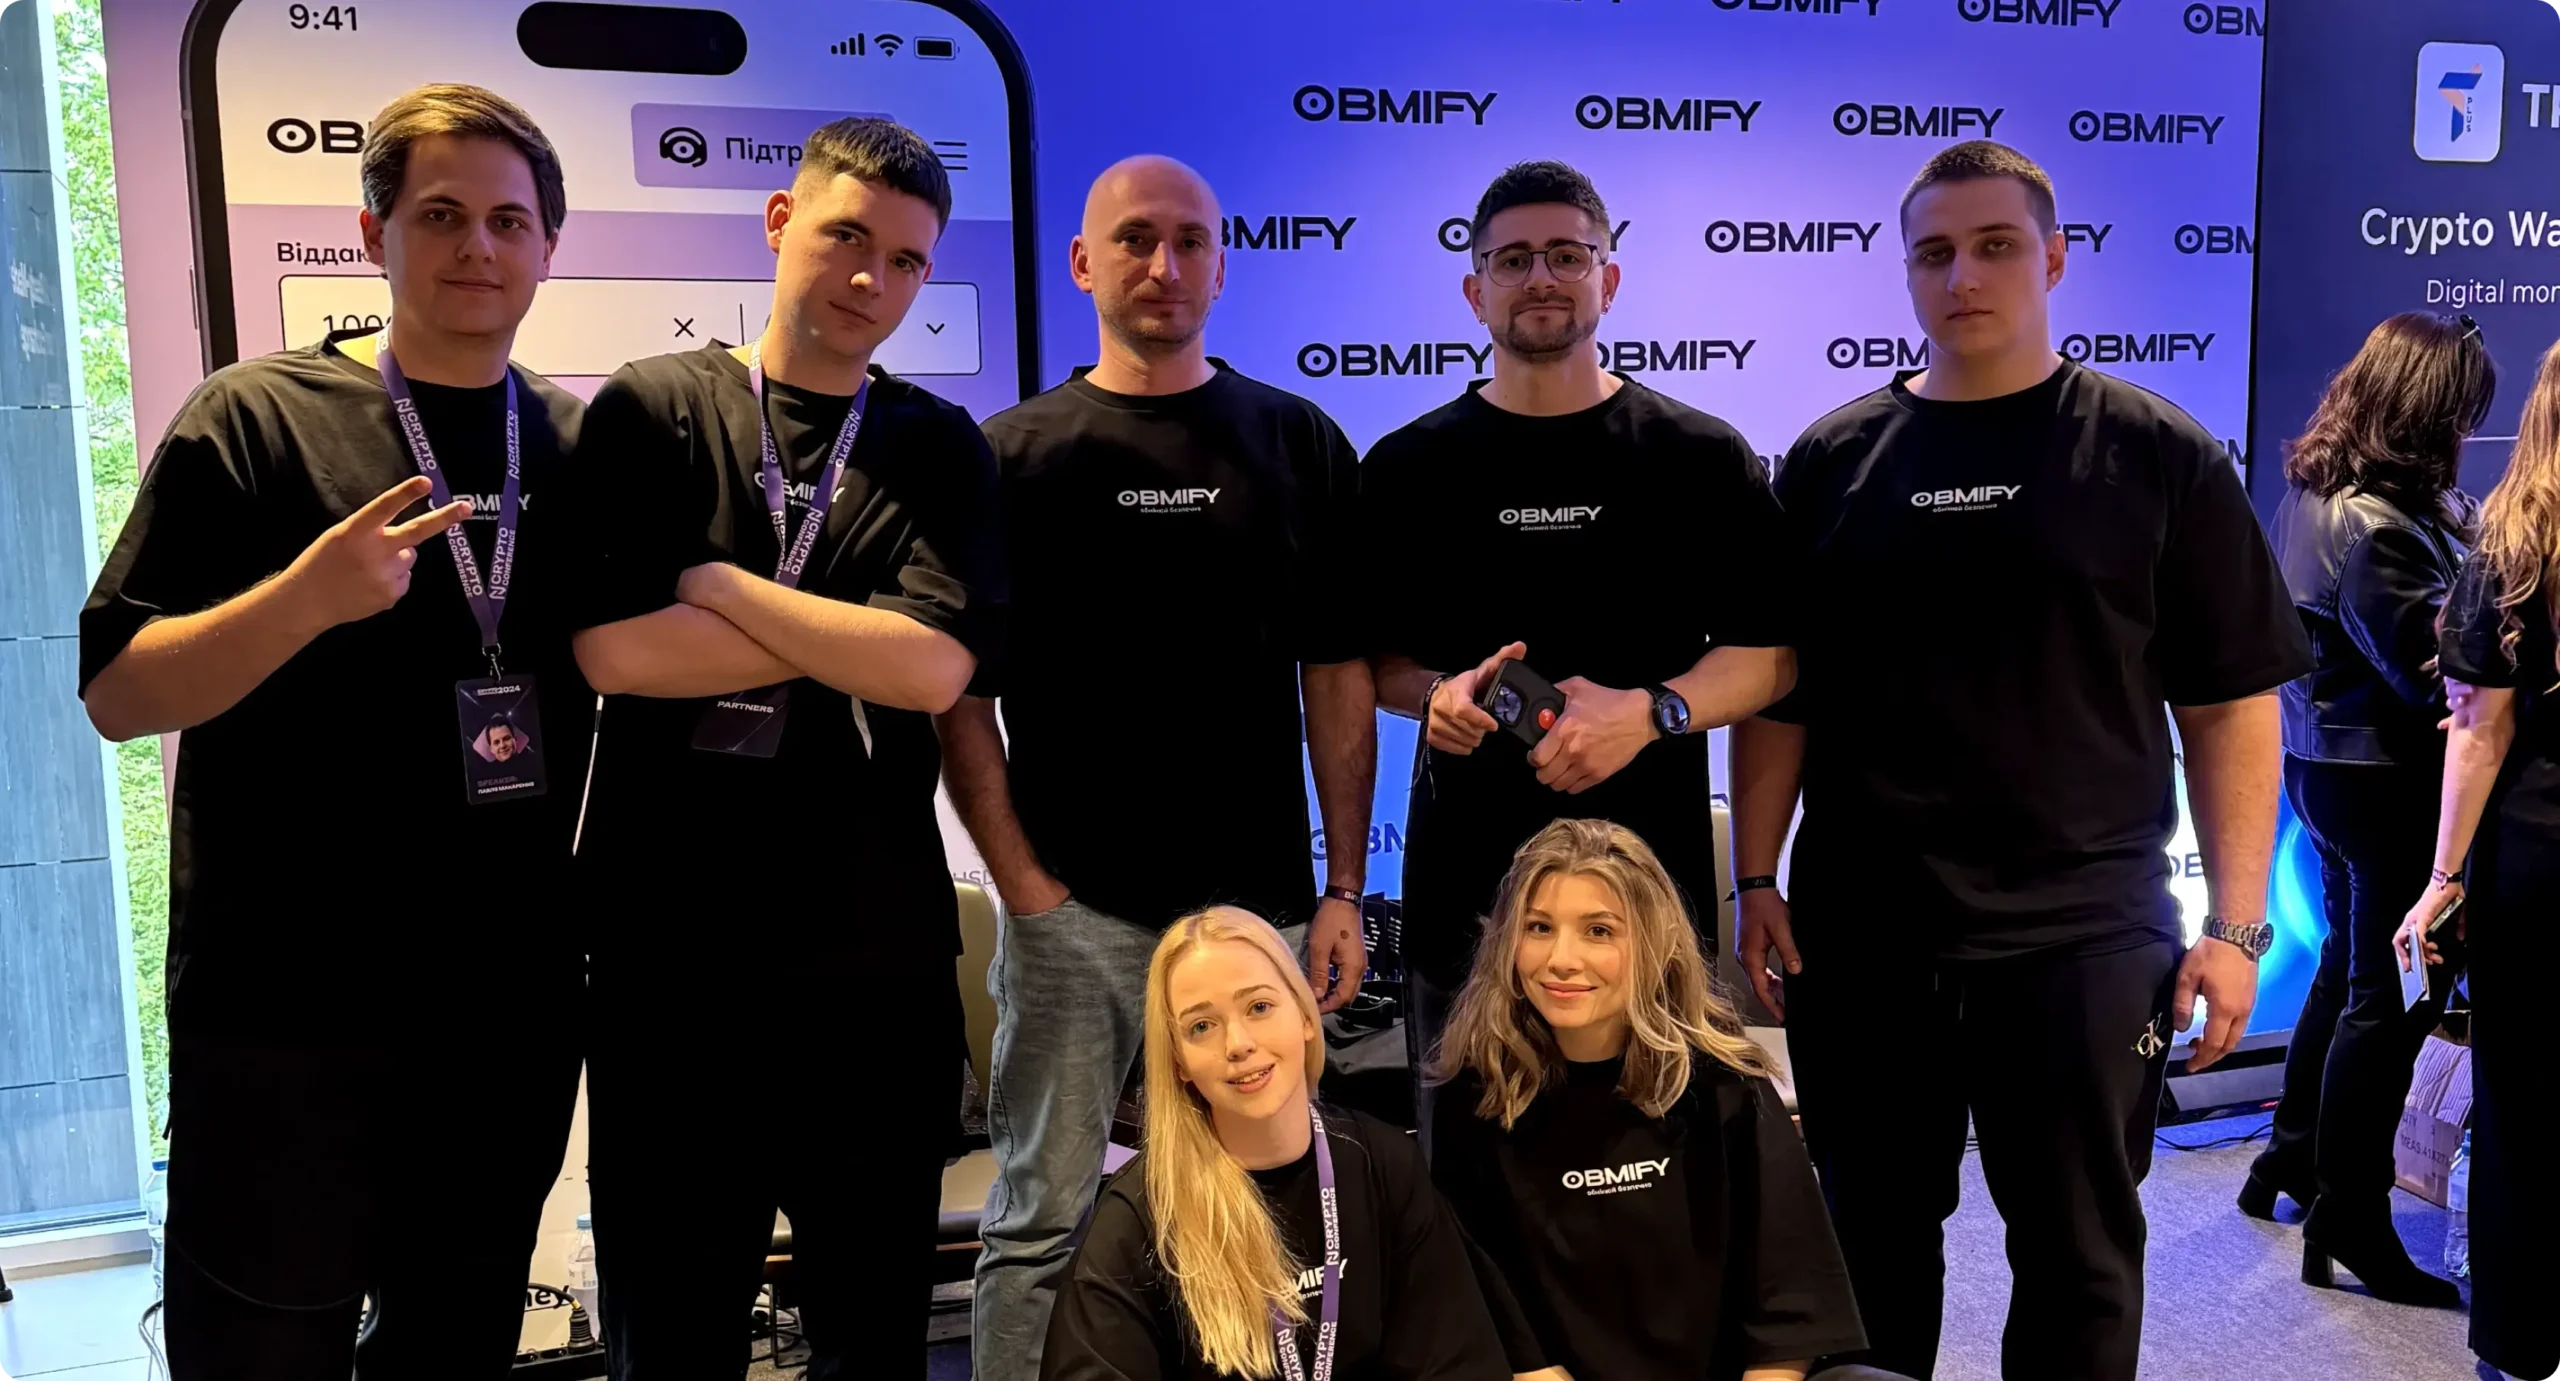 Obmify at the NCrypto Conference